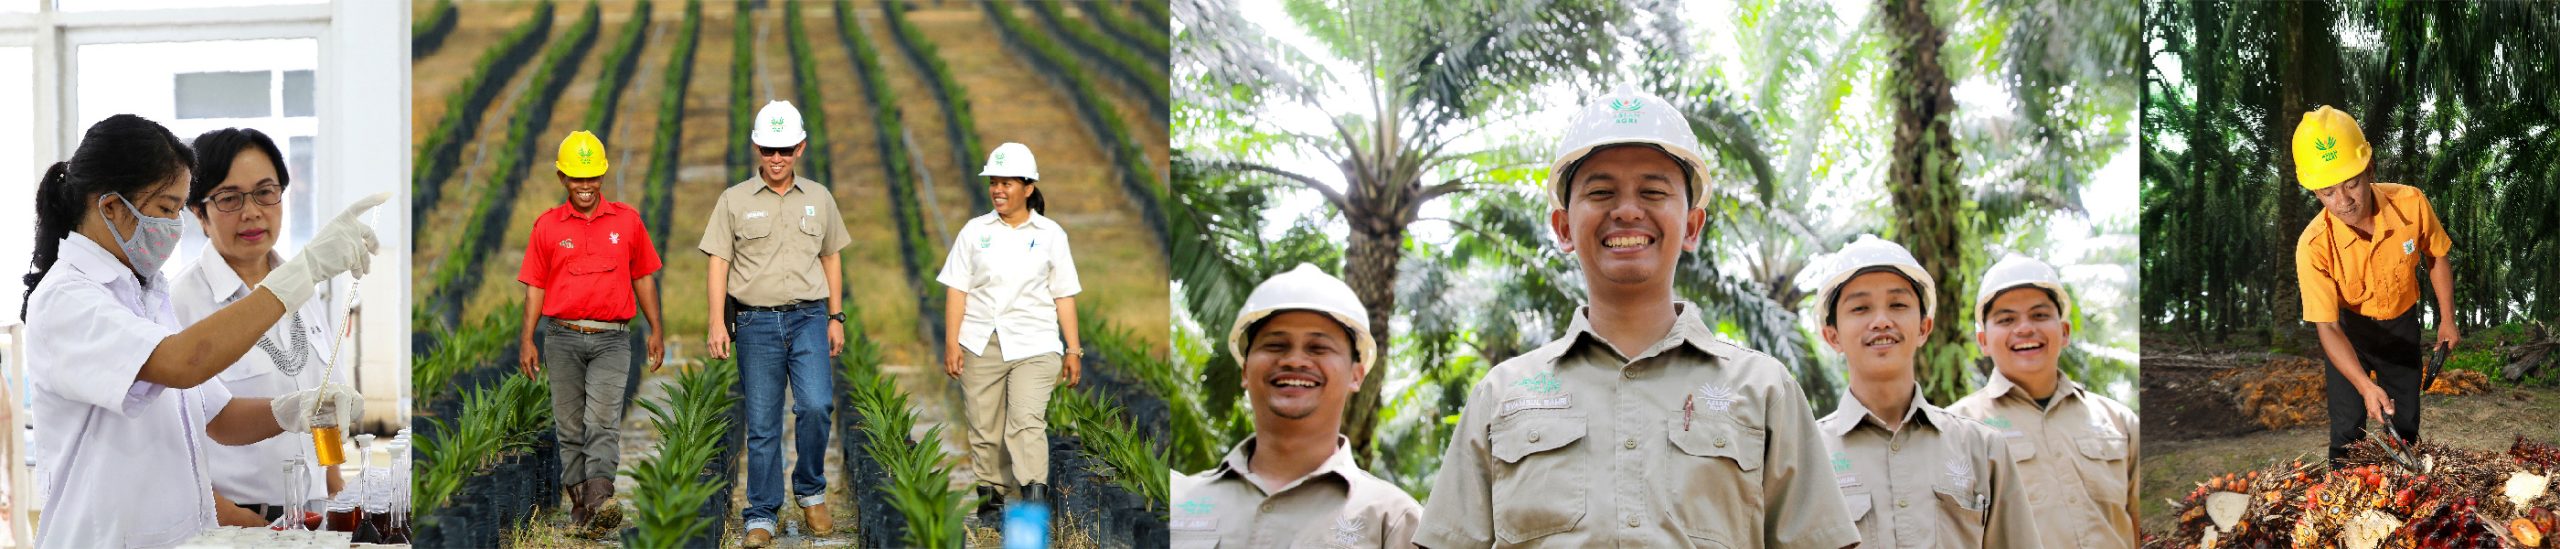 Asian Agri’s Graduate Trainee Program is Open for Applications